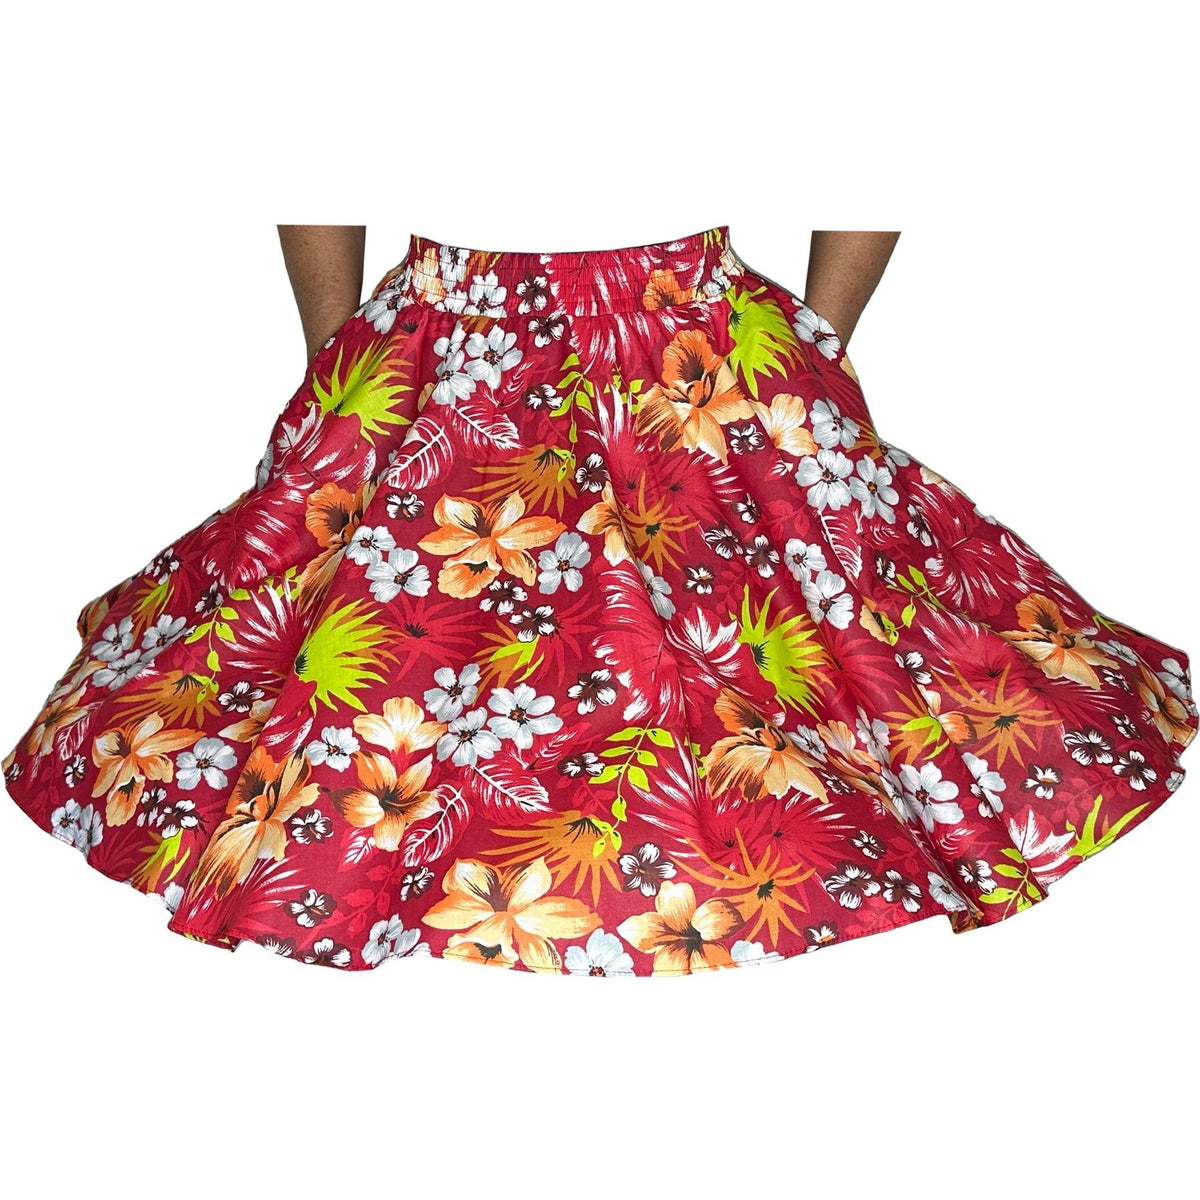 A woman wearing a Tropical Hawaiian Square Dance Skirt by Square Up Fashions.